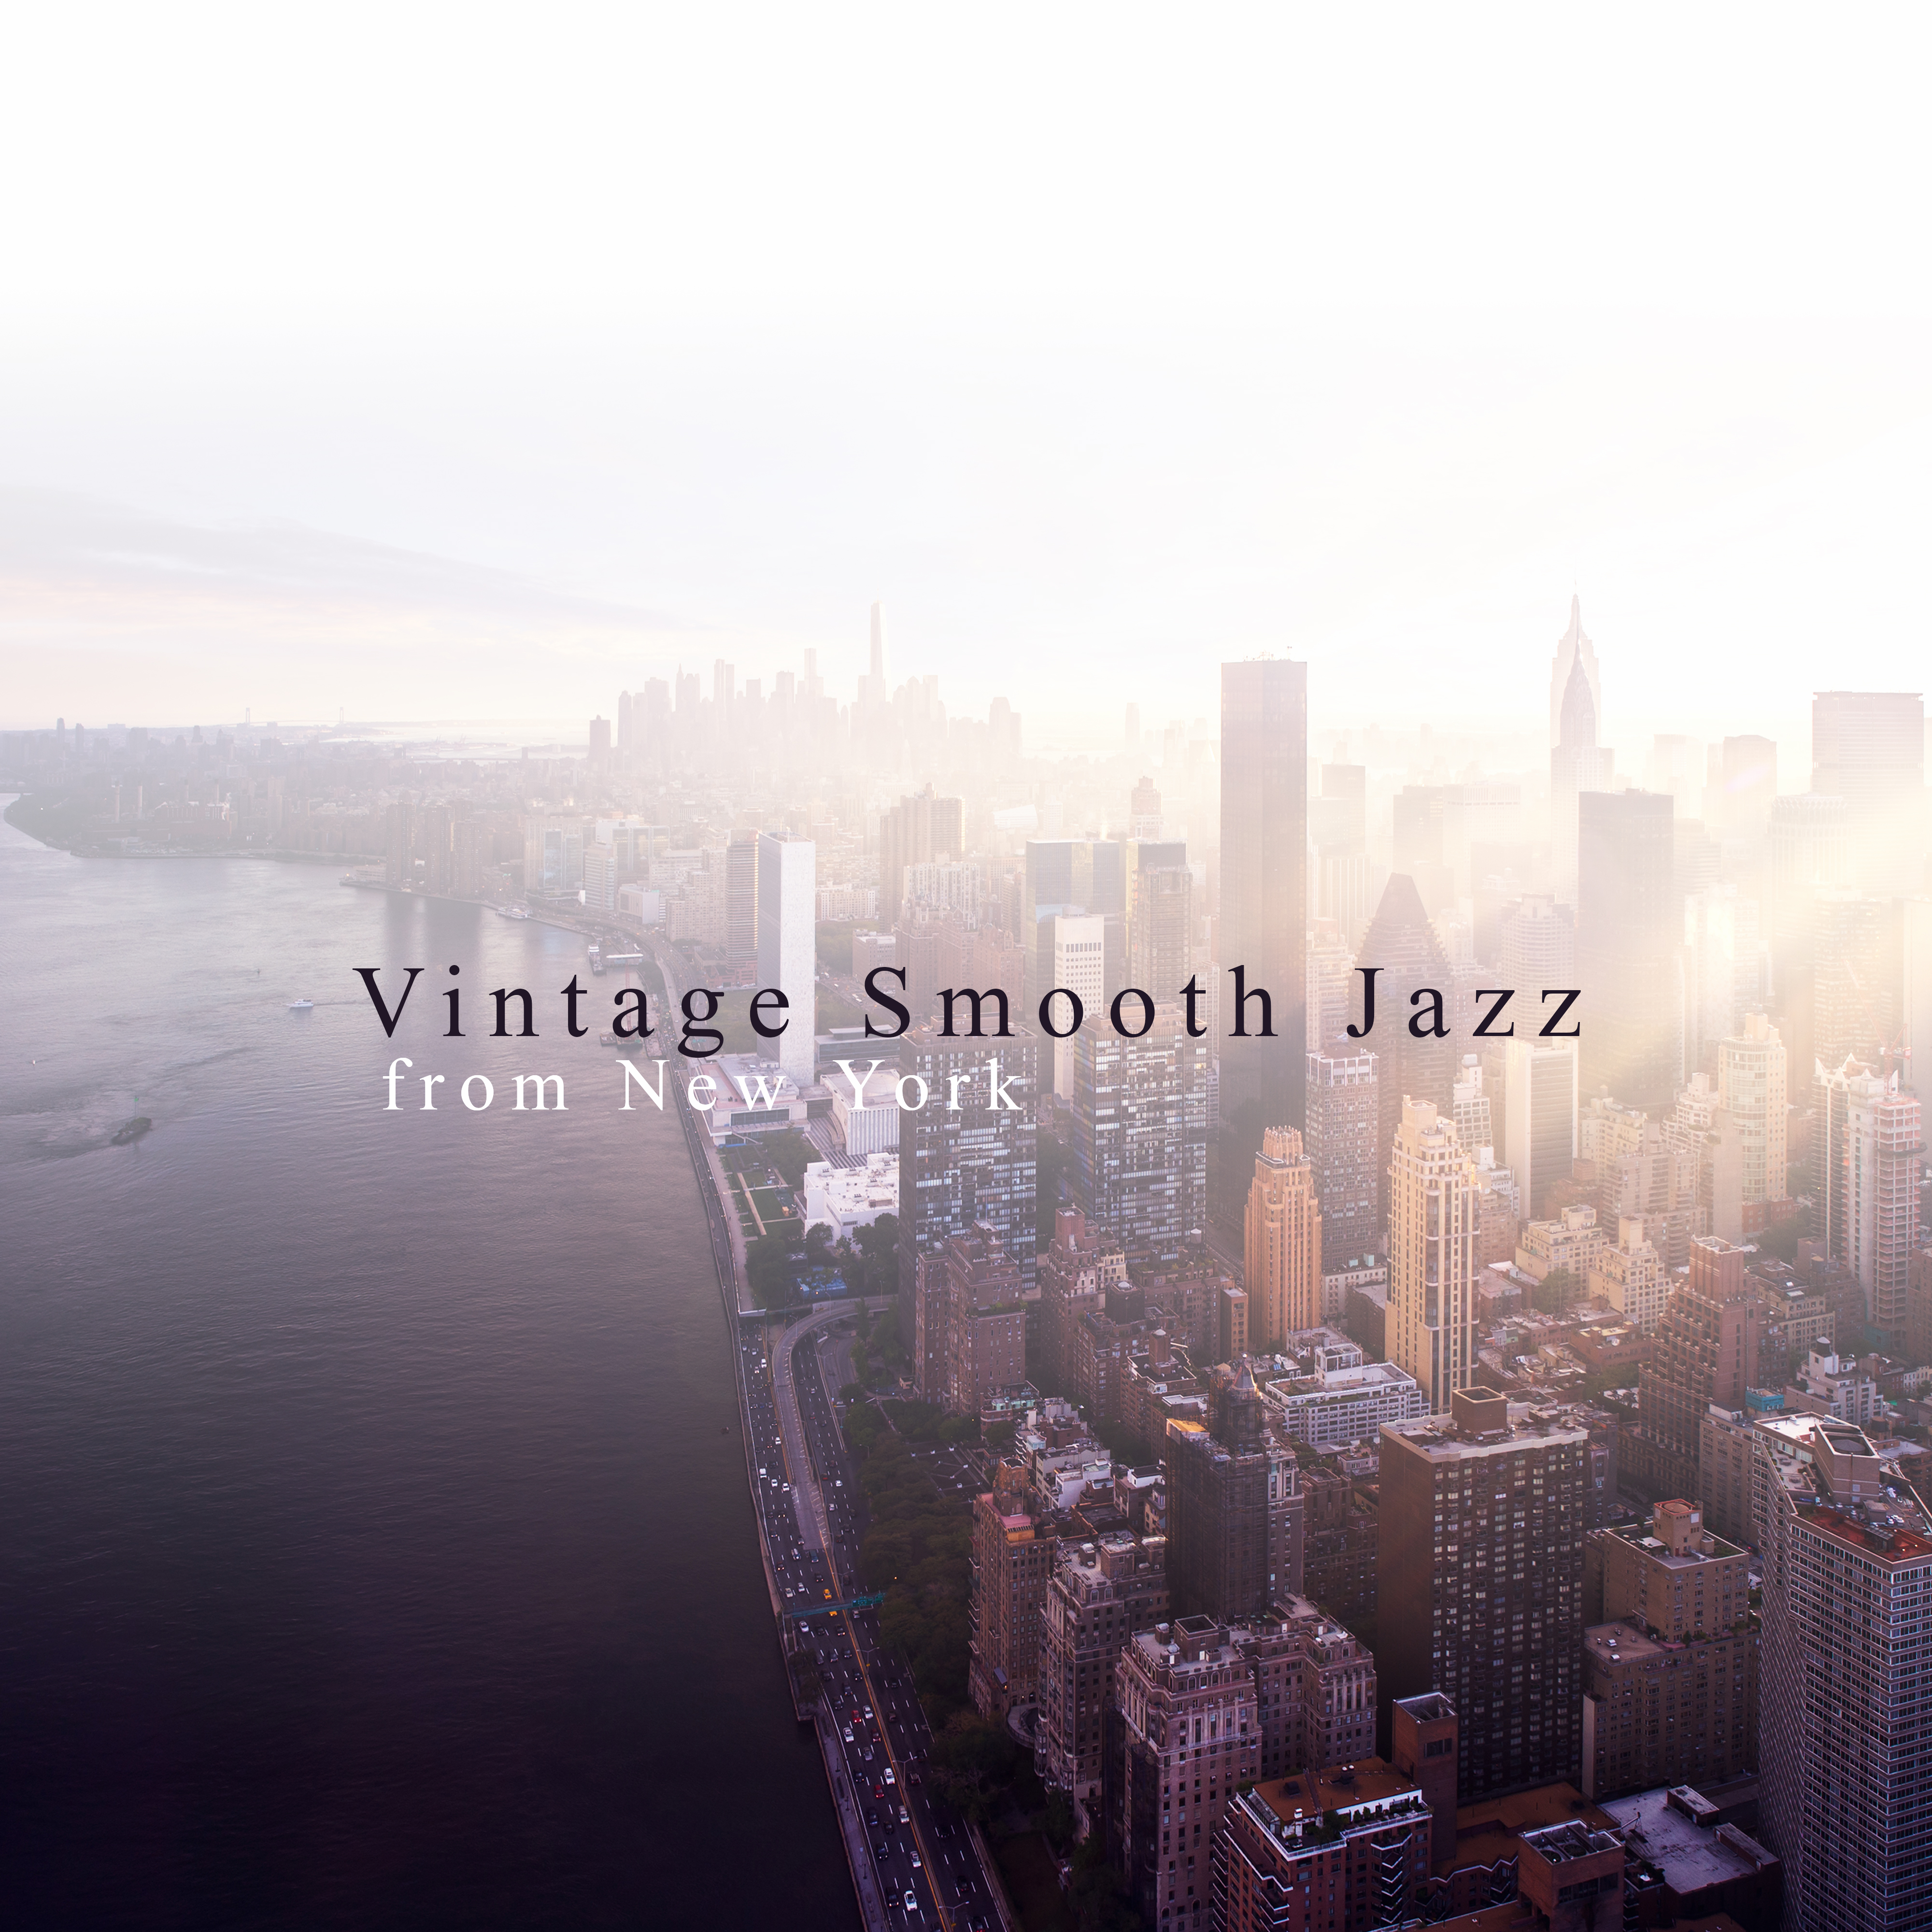 Vintage Smooth Jazz from New York